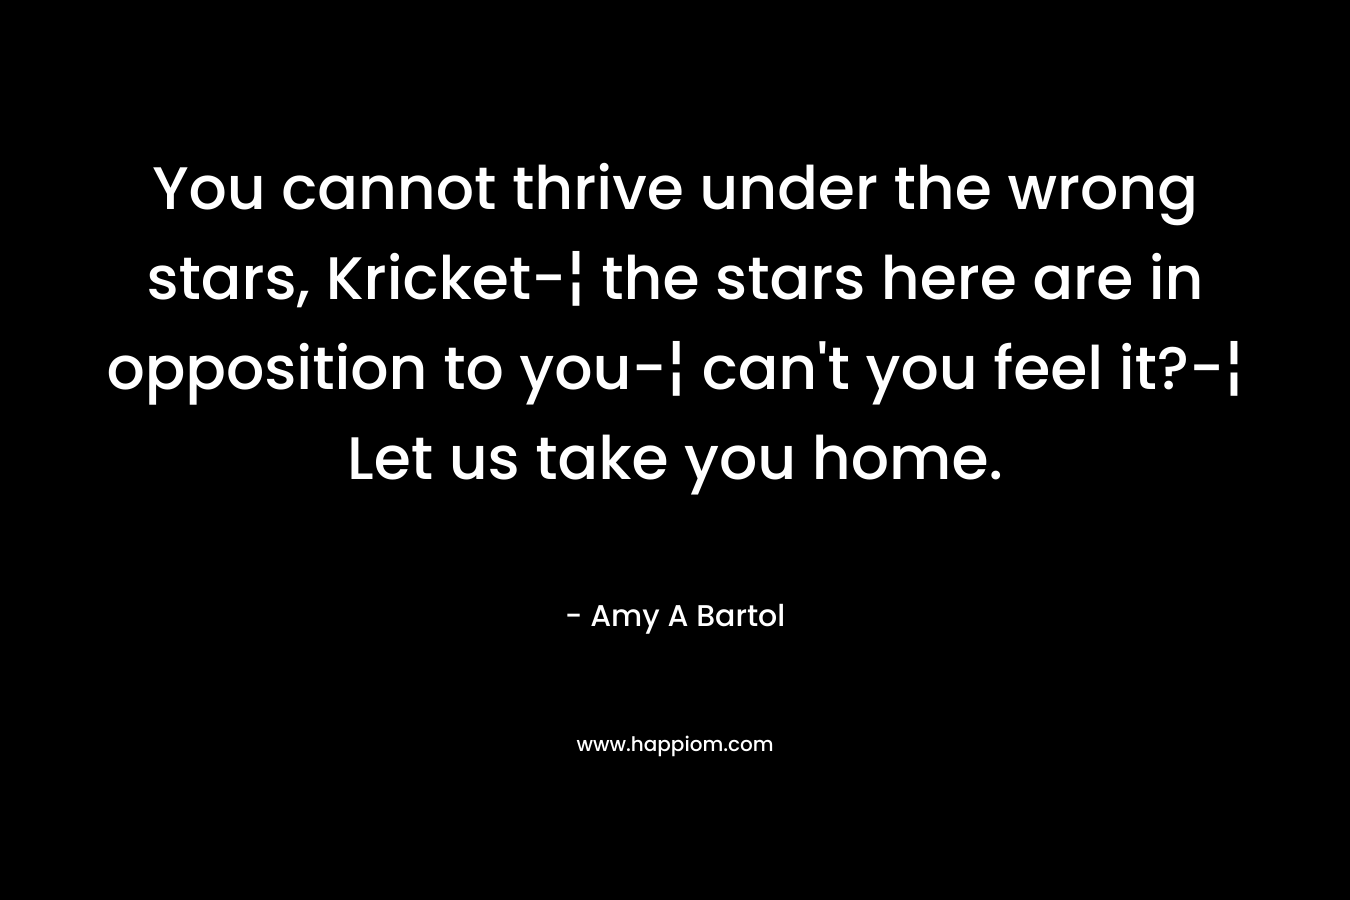 You cannot thrive under the wrong stars, Kricket-¦ the stars here are in opposition to you-¦ can't you feel it?-¦ Let us take you home.